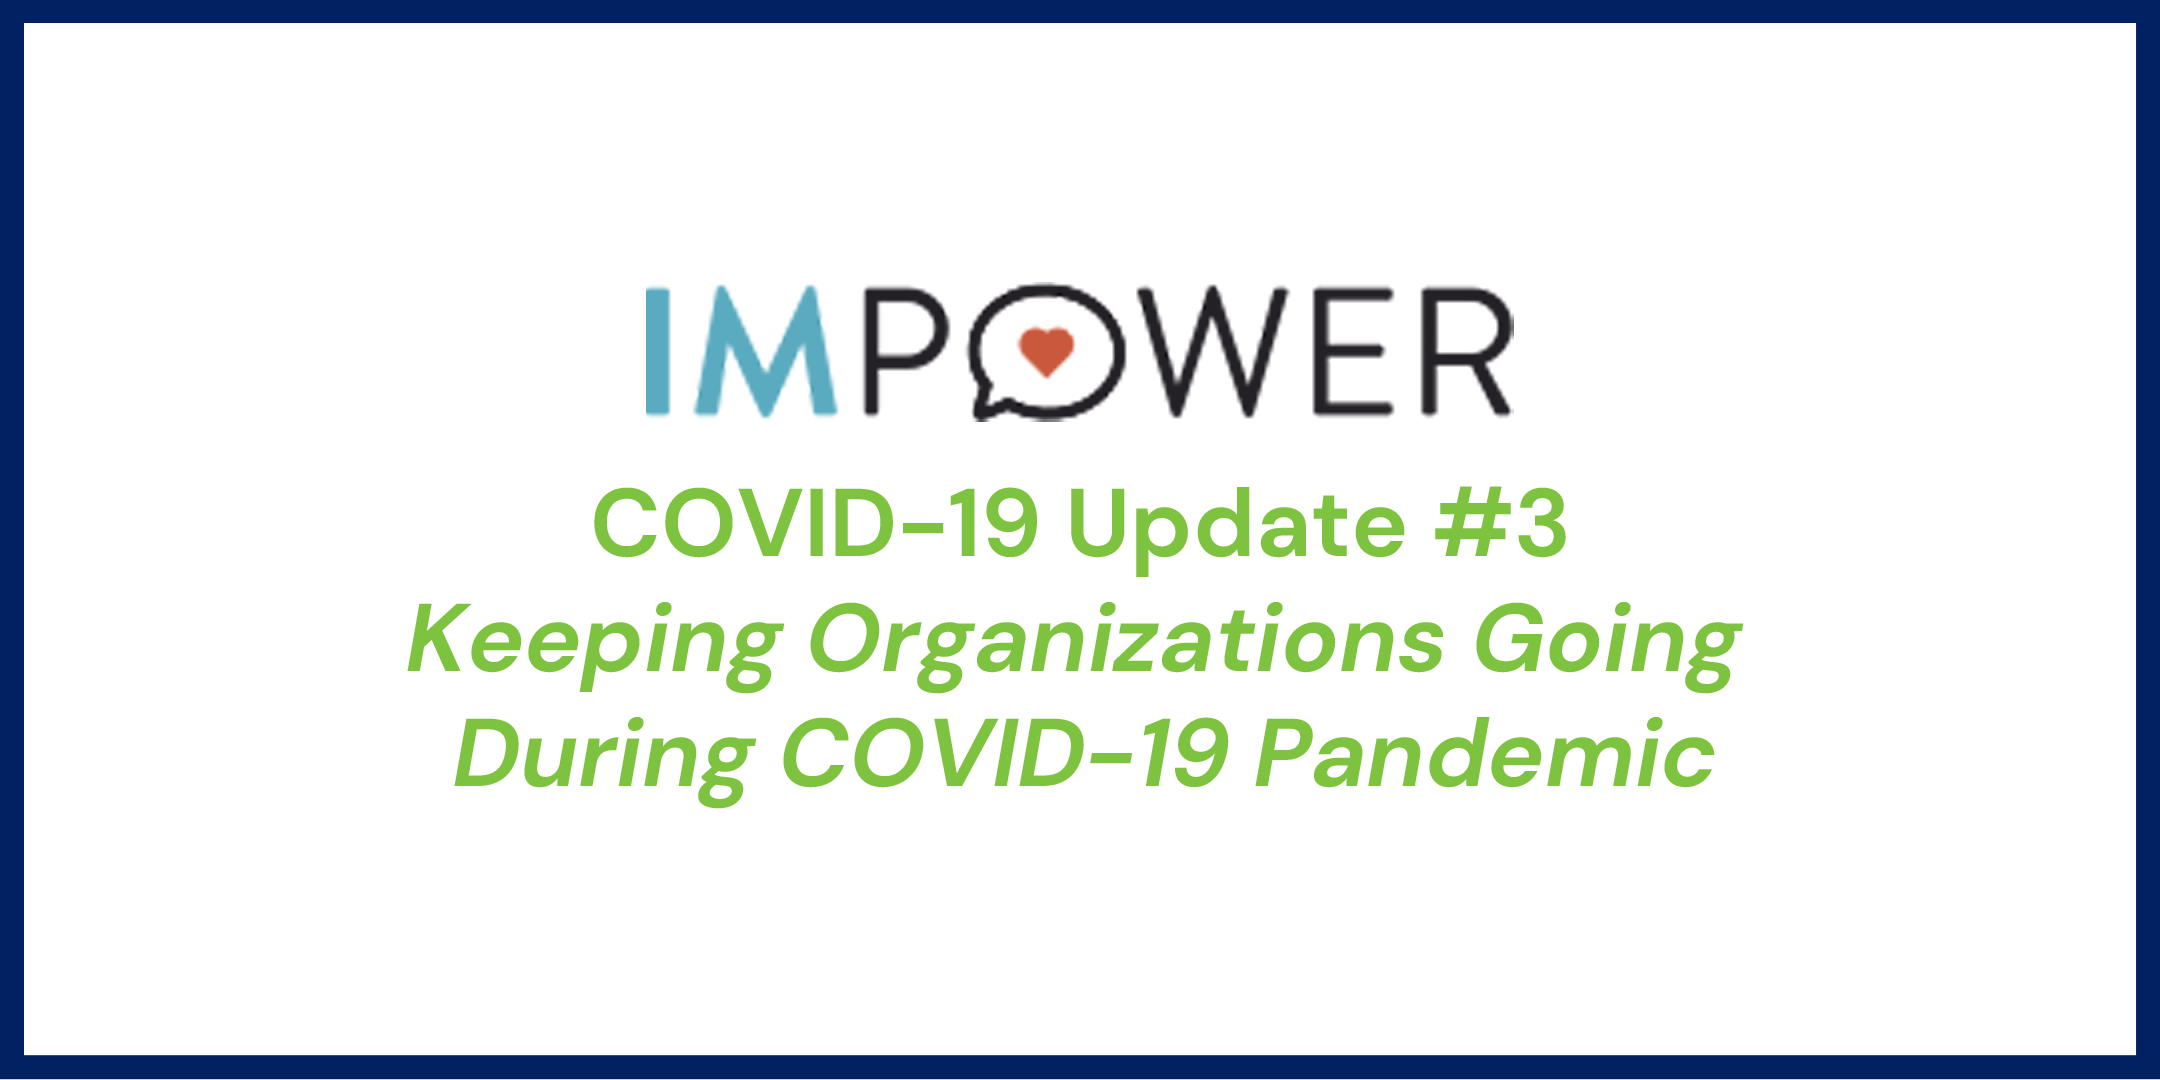 Keeping Organizations Going During COVID-19 Pandemic